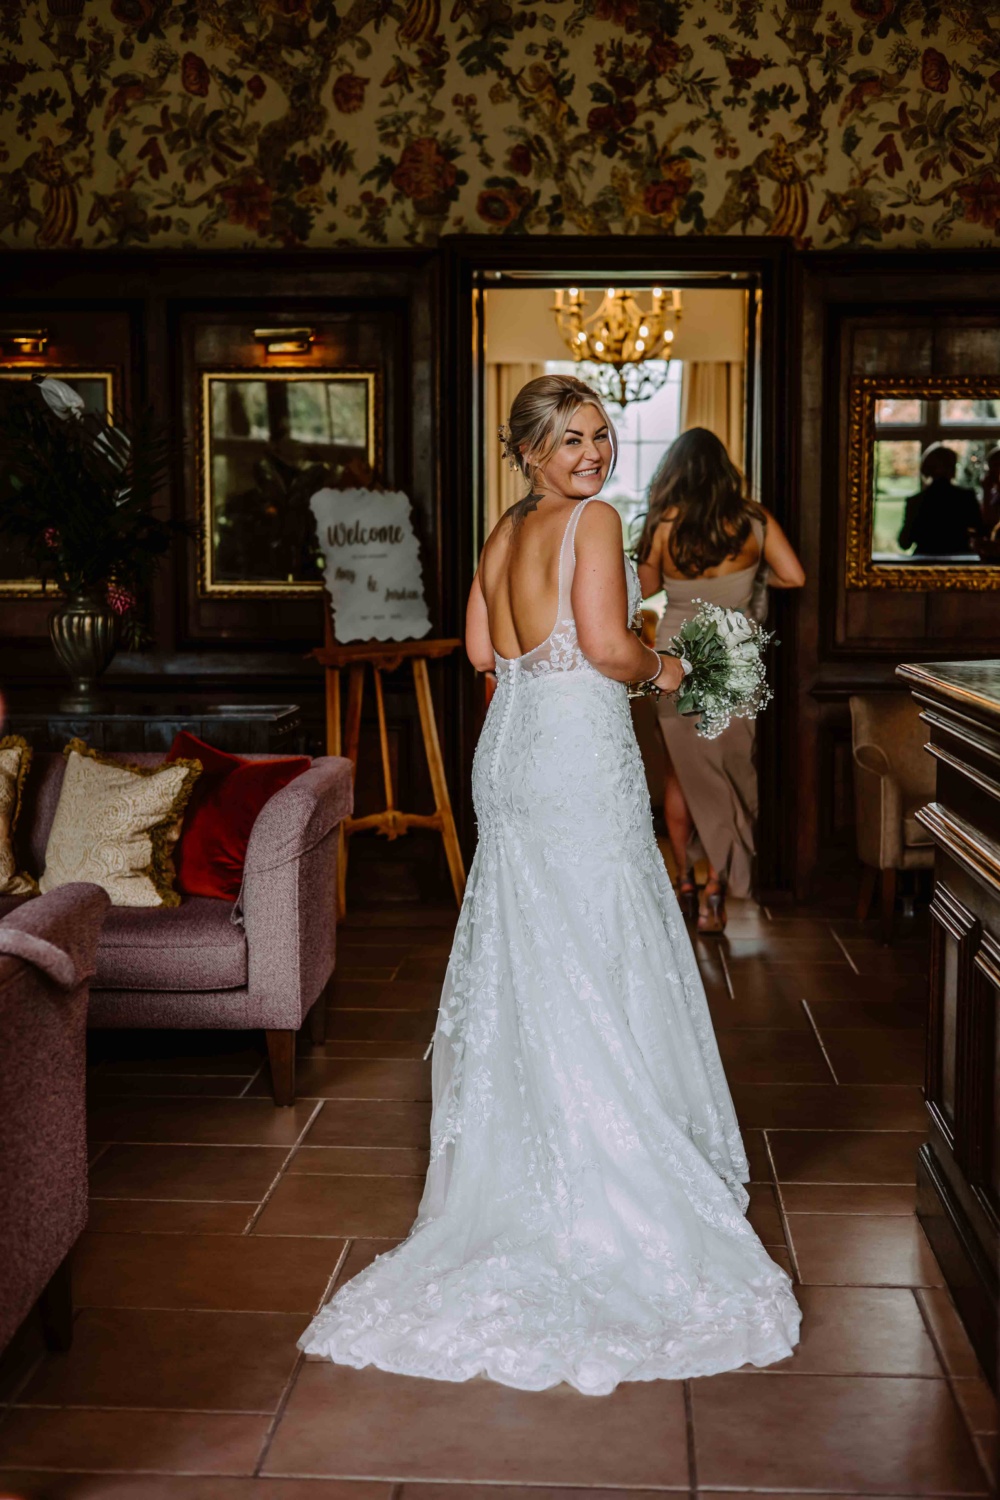 Bride happily glancing over her shoulder while walking in the entrance hall of Rowton Castle.